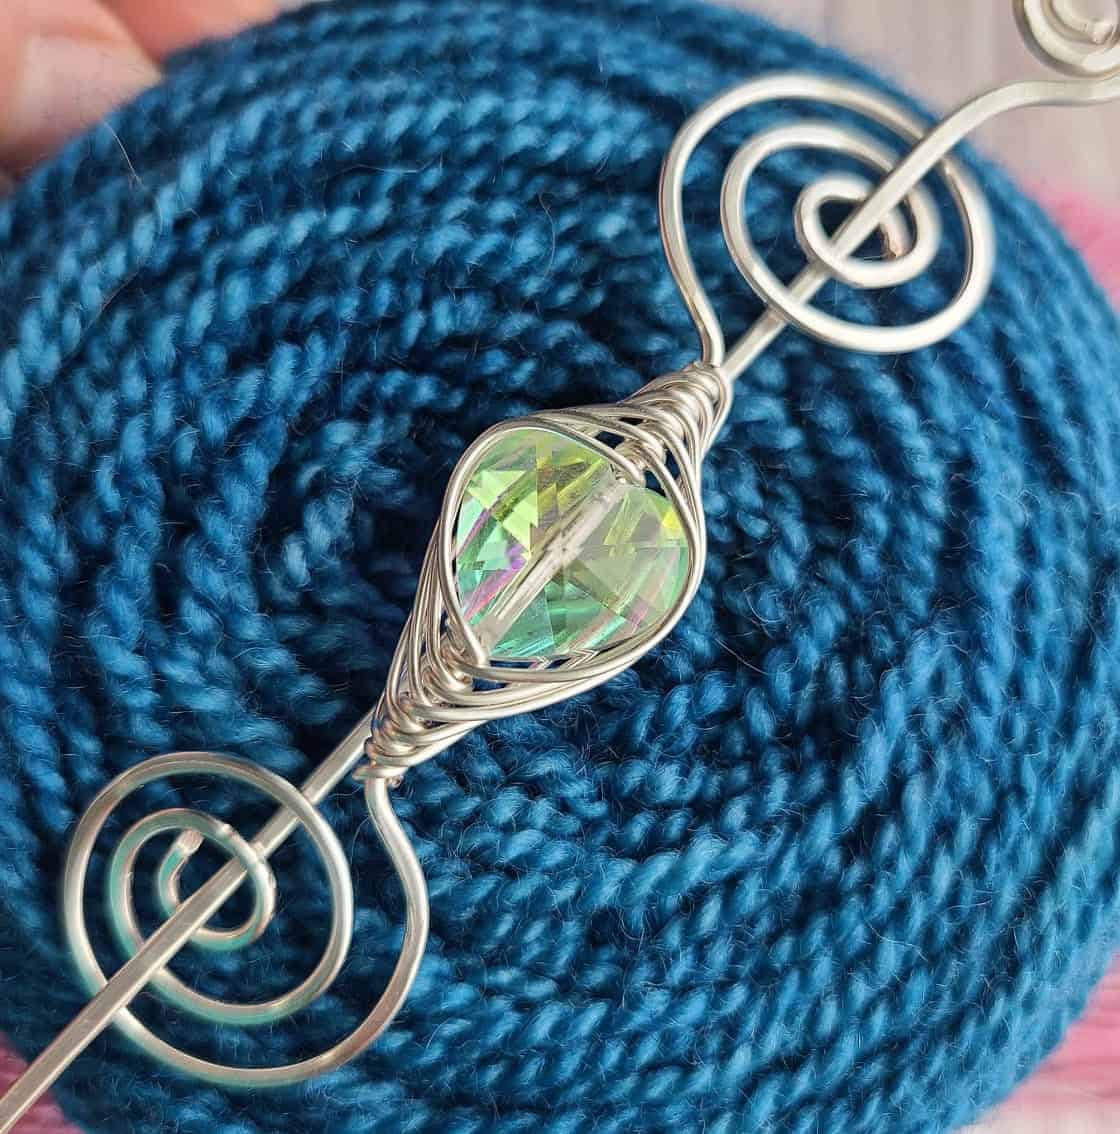 A silver shawl pin with a green stone on a cake of blue yarn.